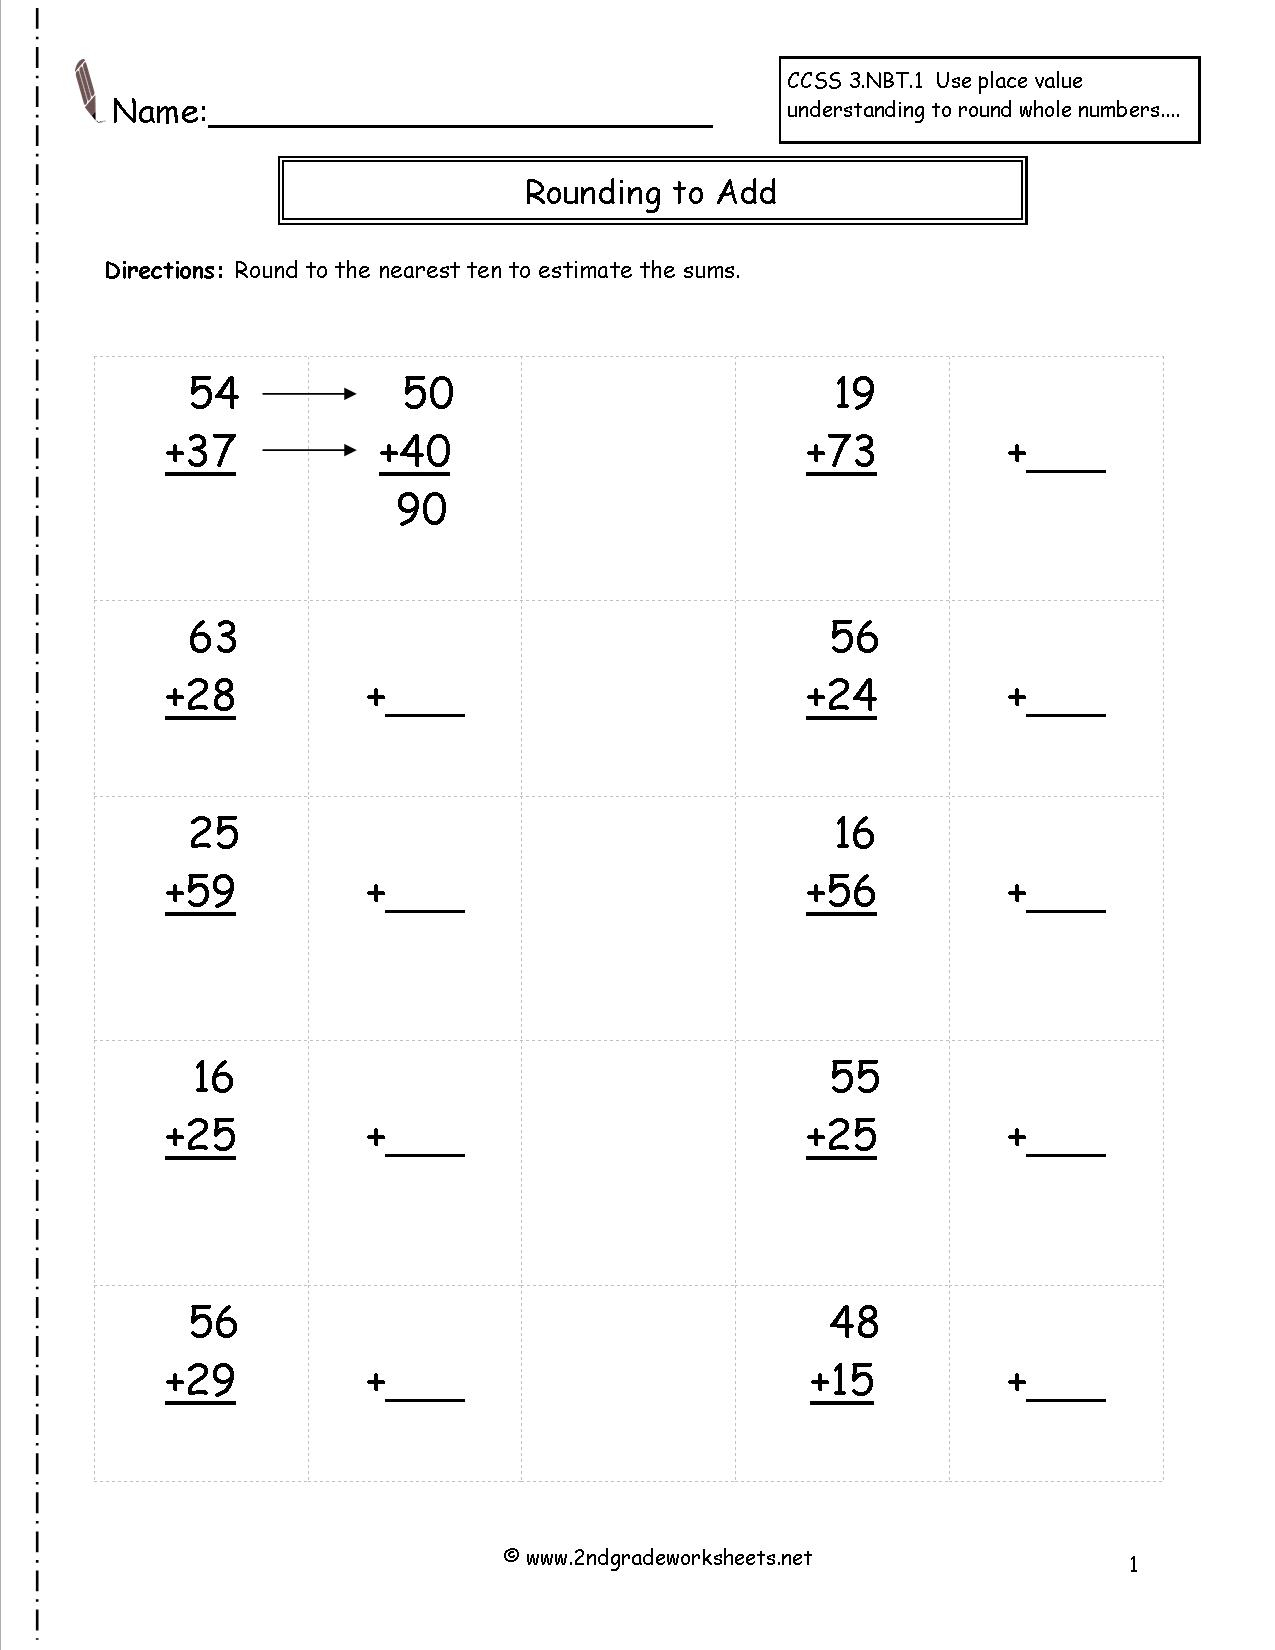 Rounding Whole Numbers Worksheets | Rounding To The Nearest Ten Worksheet Printable